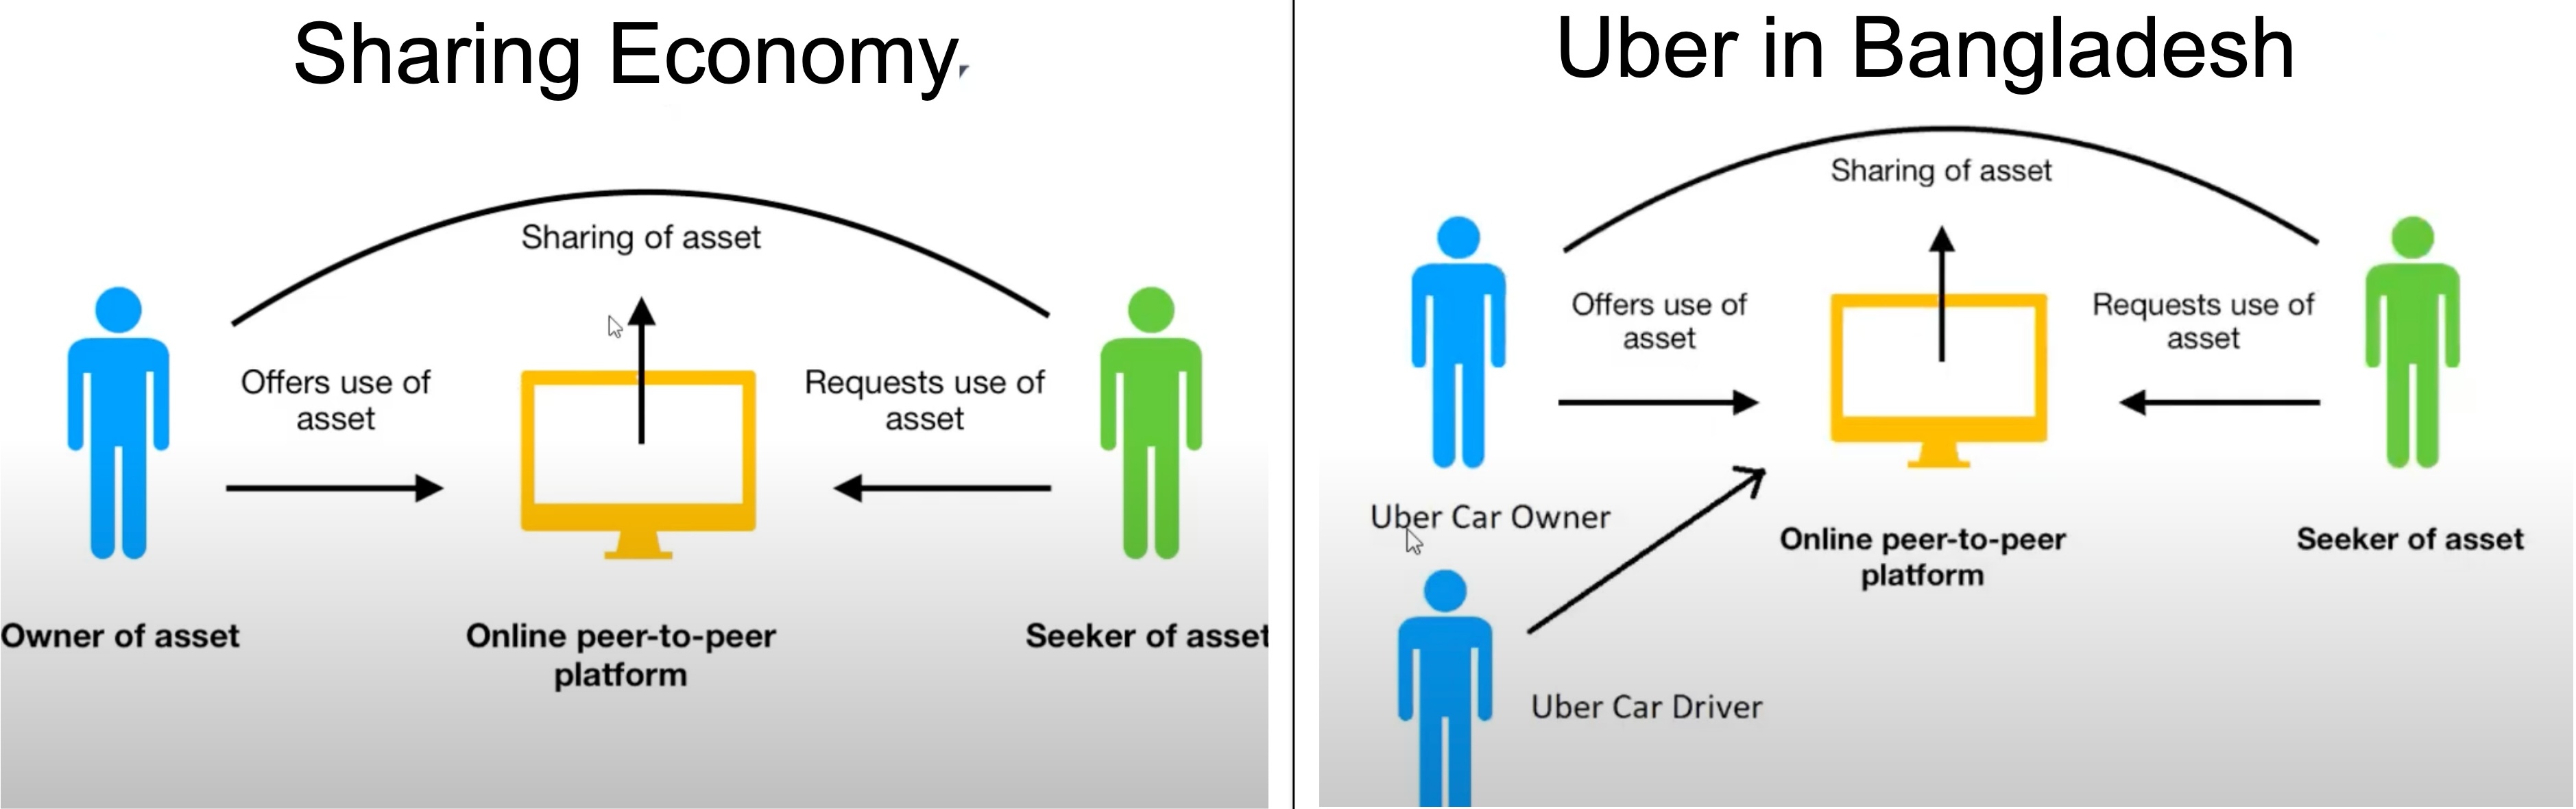 How Uber in Bangladesh deviates from traditional sharing economy